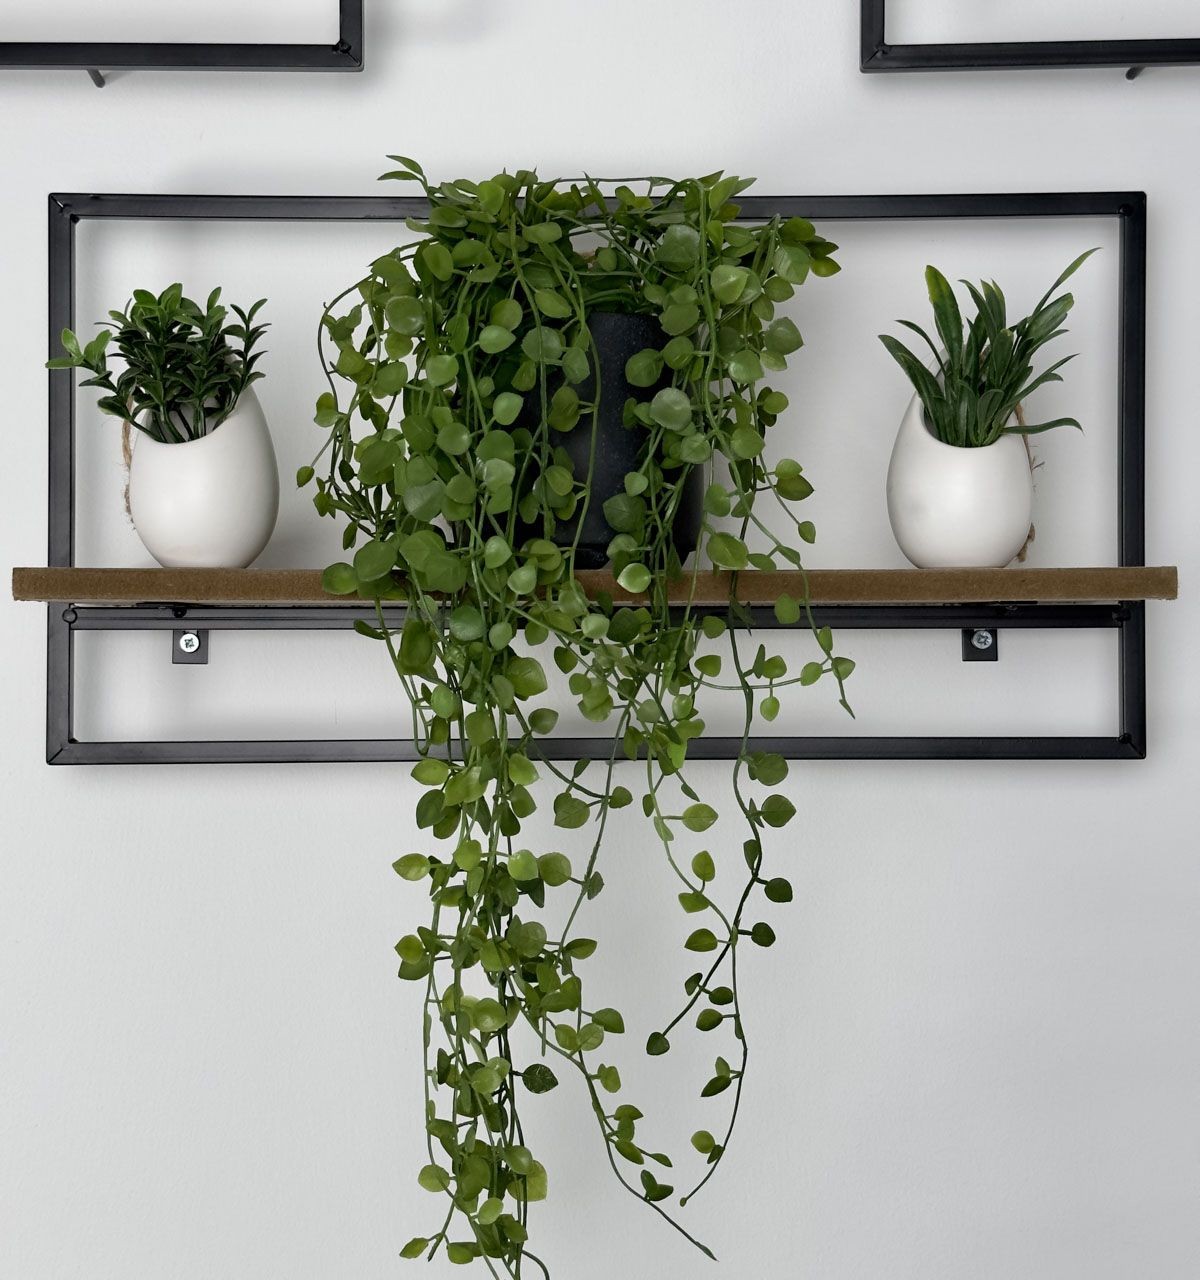 Place Your Plants On Shelves